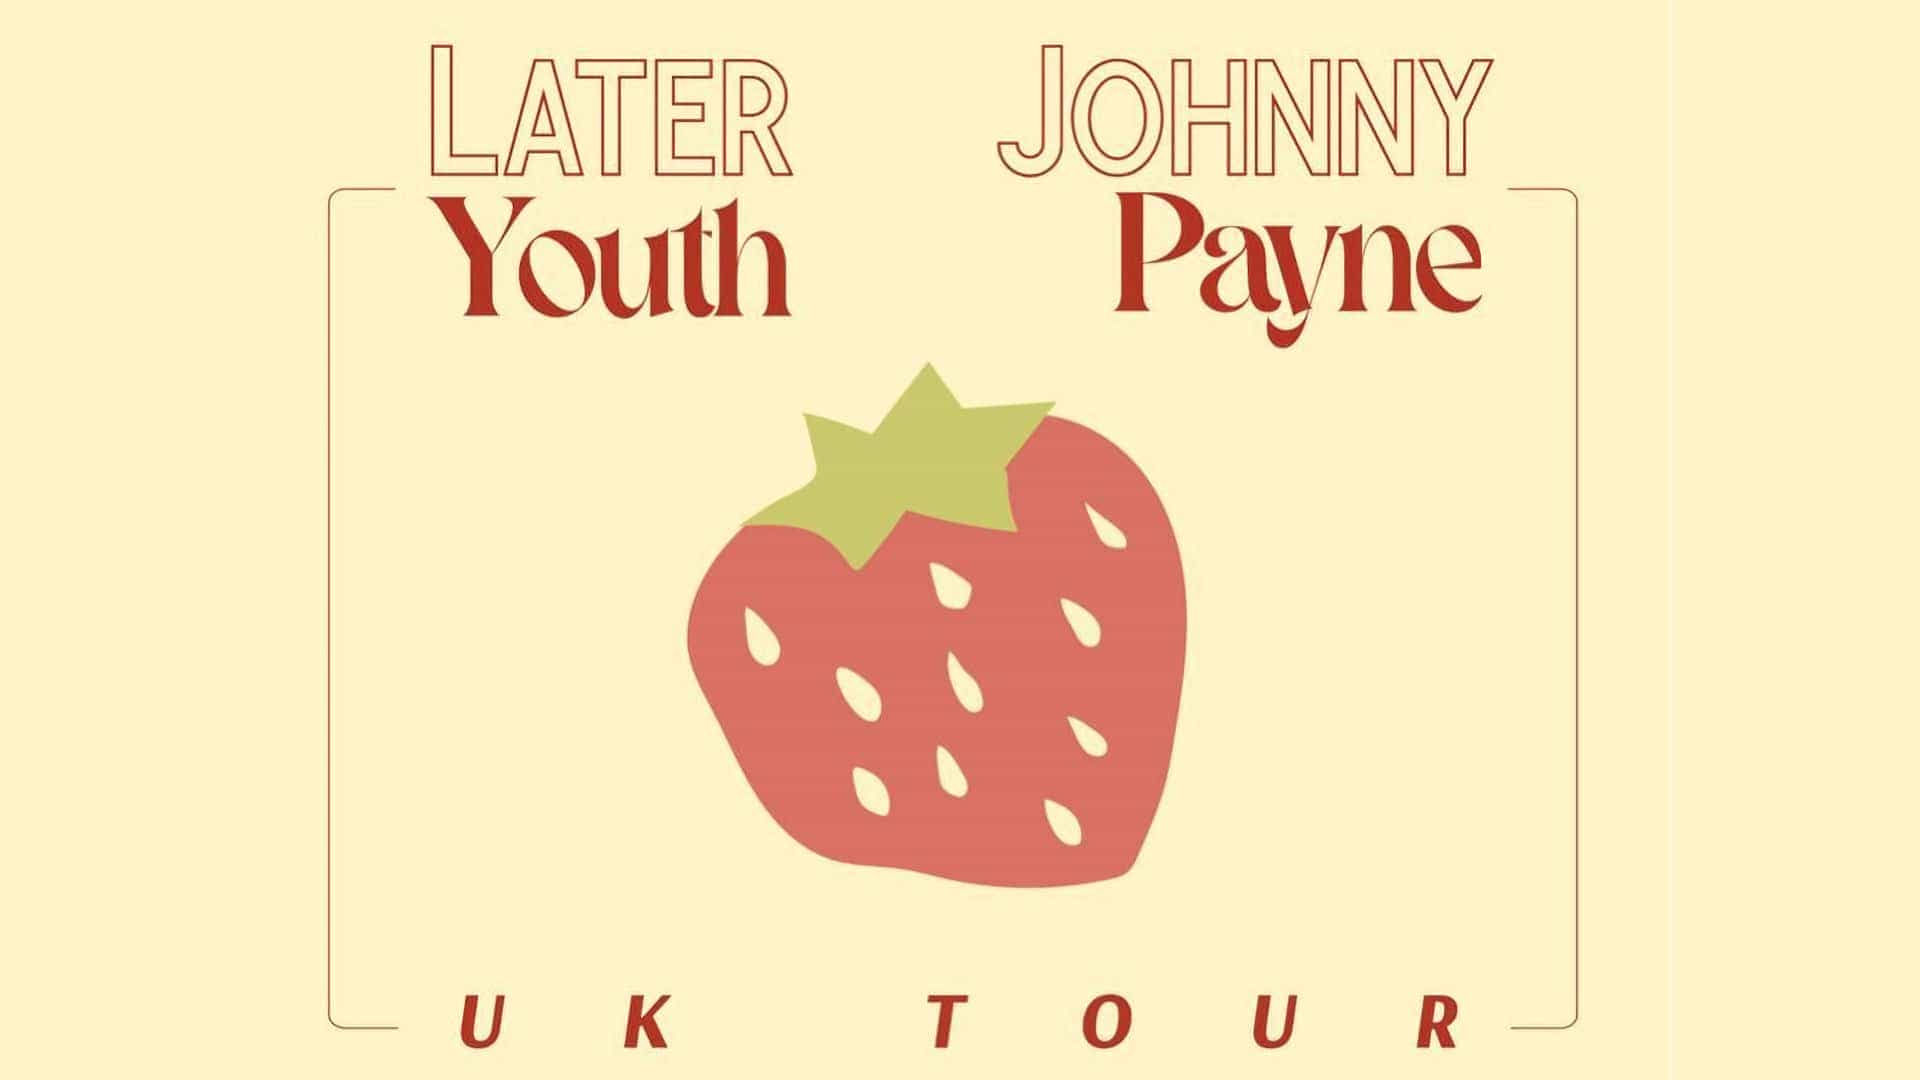 Later Youth + Johnny Payne